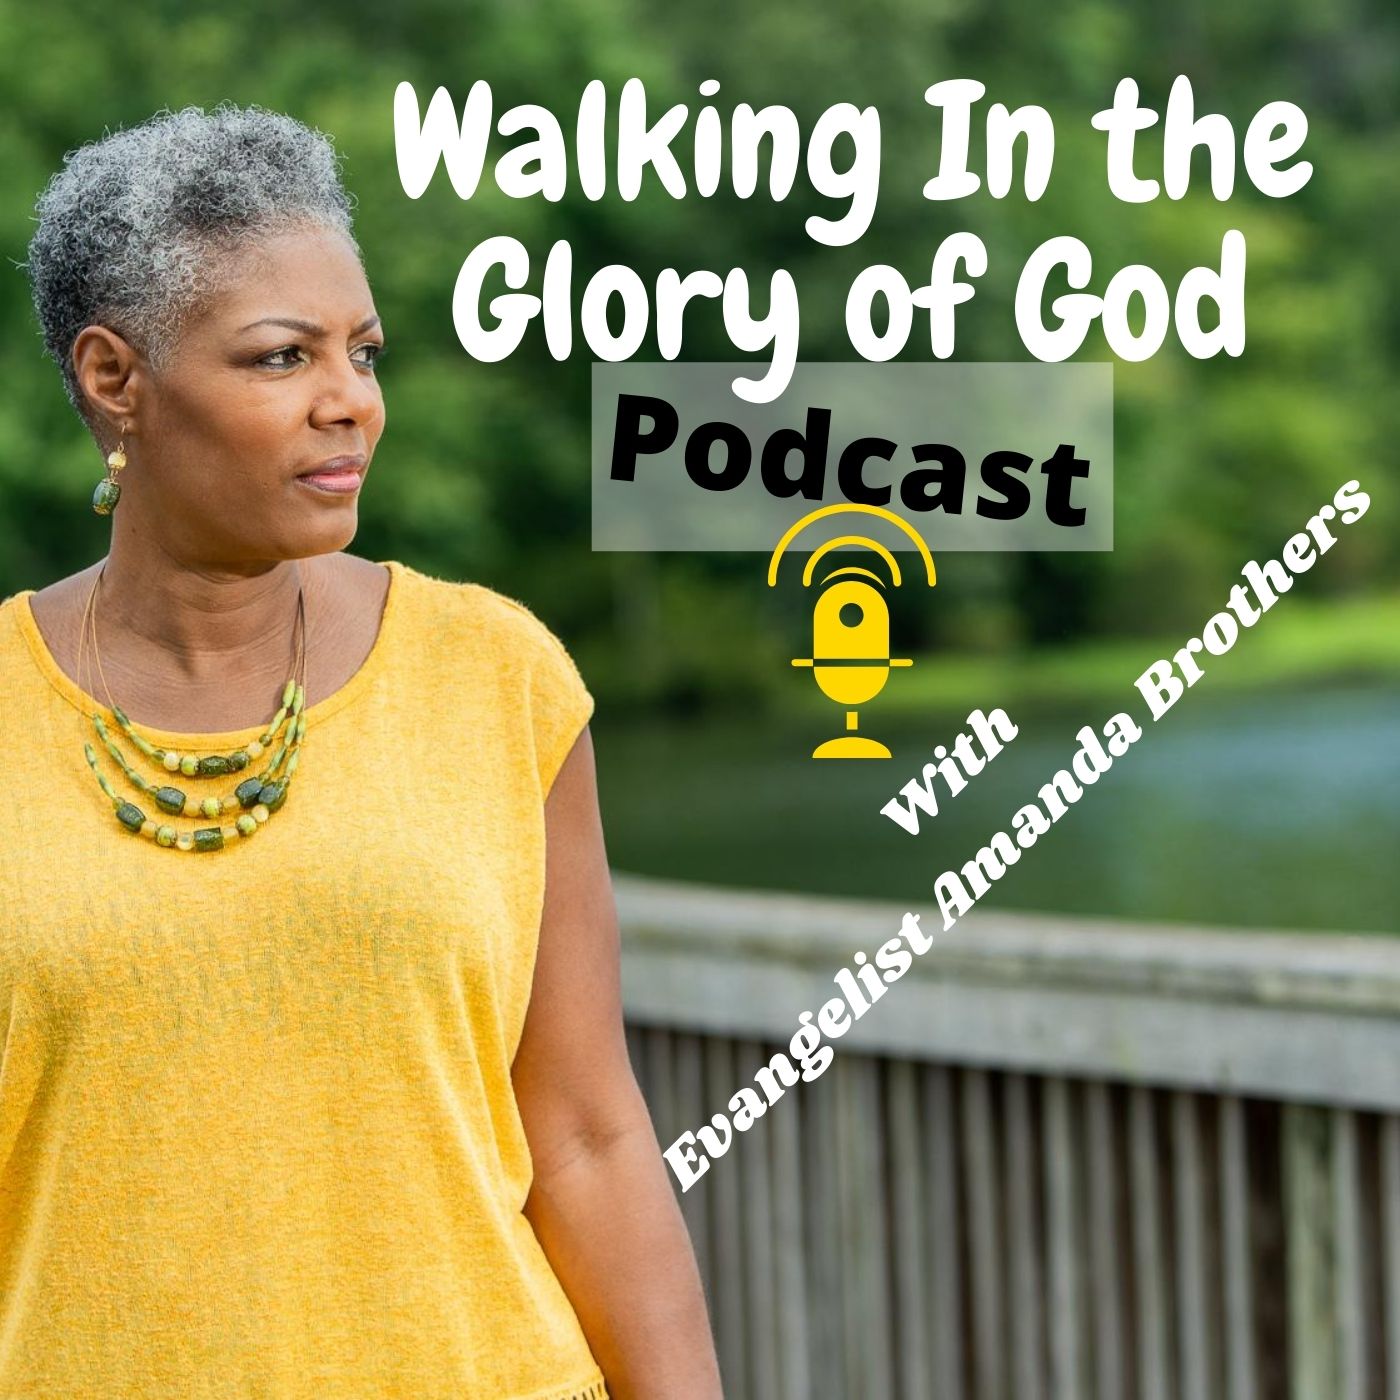 Walking In the Glory of God Podcast